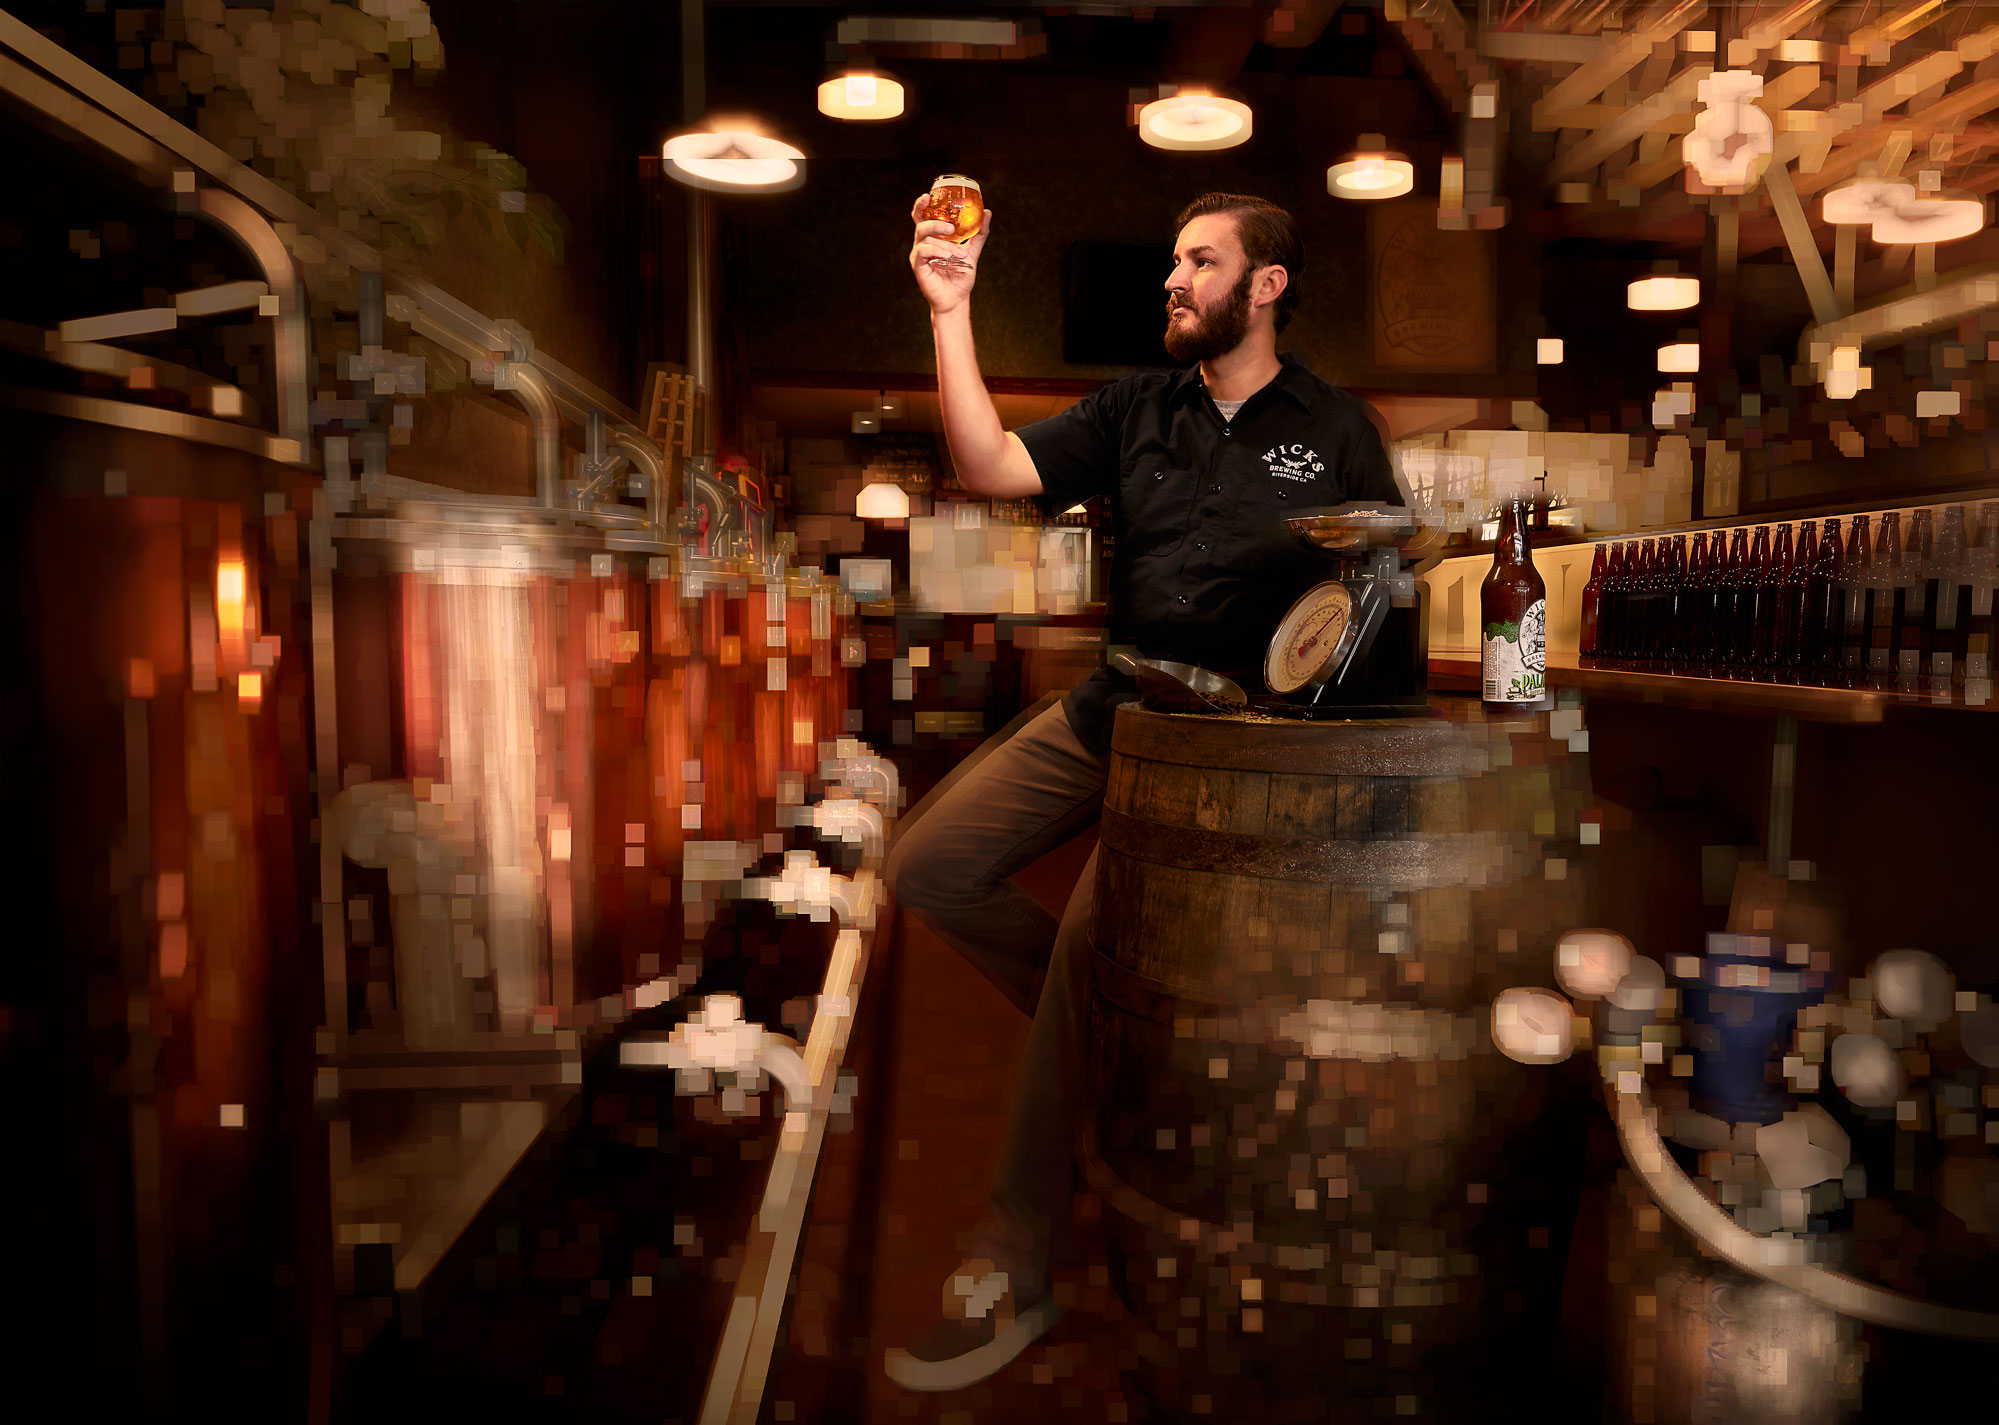 Wicks Brewery, a craft brewery and restaurant that has been winning brewery awards since 2013. The owner, Ryan Wicks, portraid in his brewery by Benoit Malphettes.